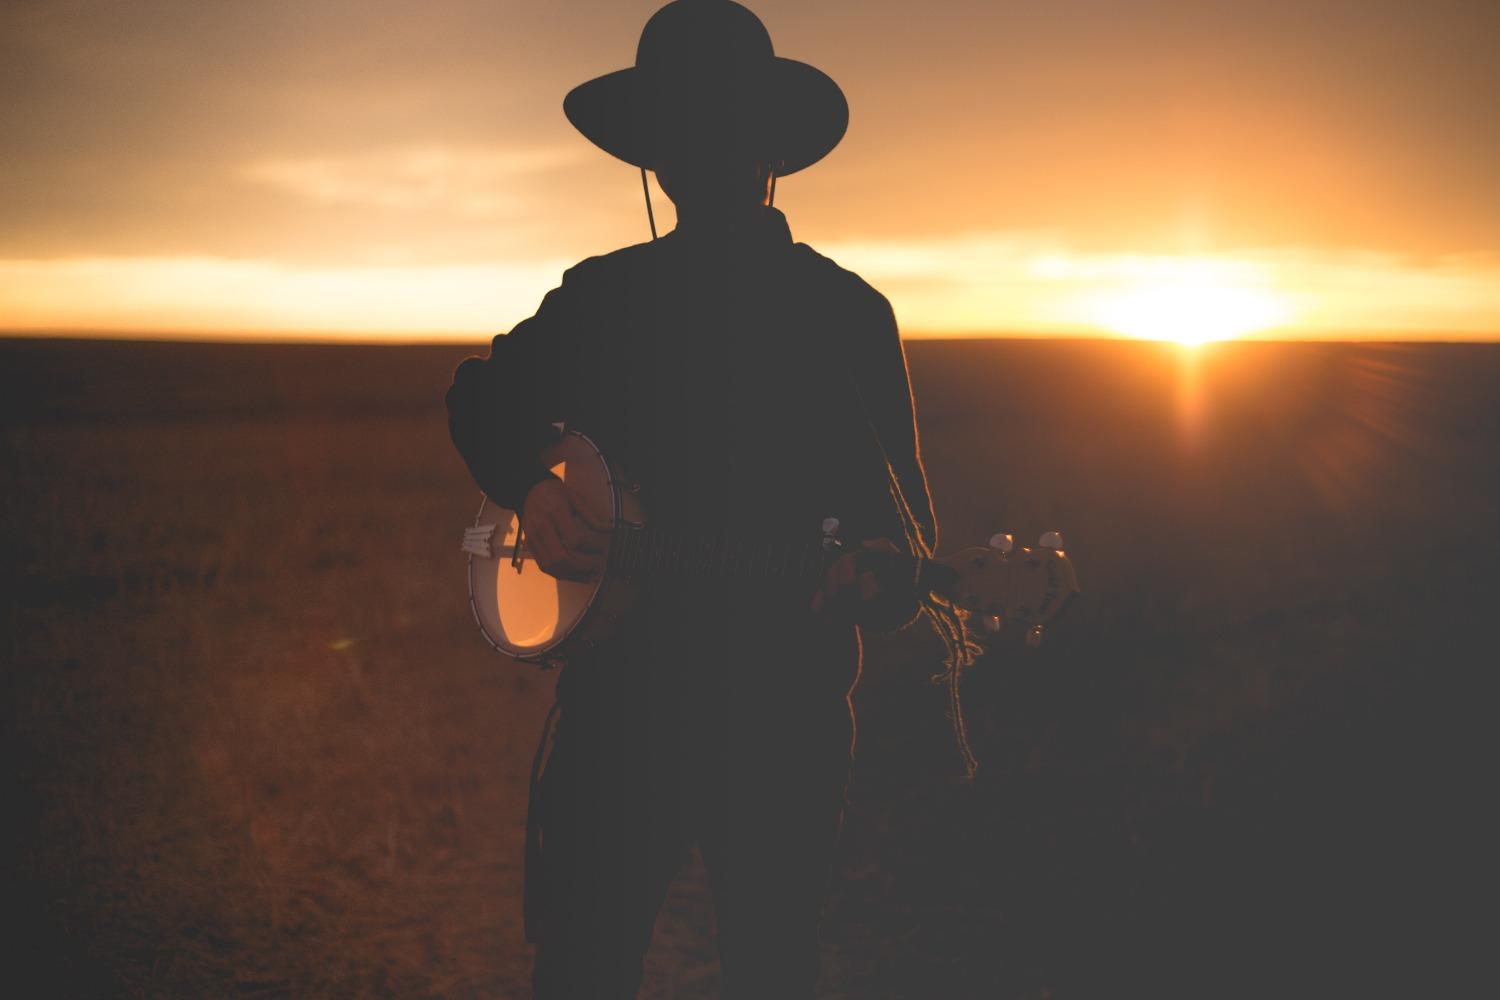 A banjo player in a field at sunset